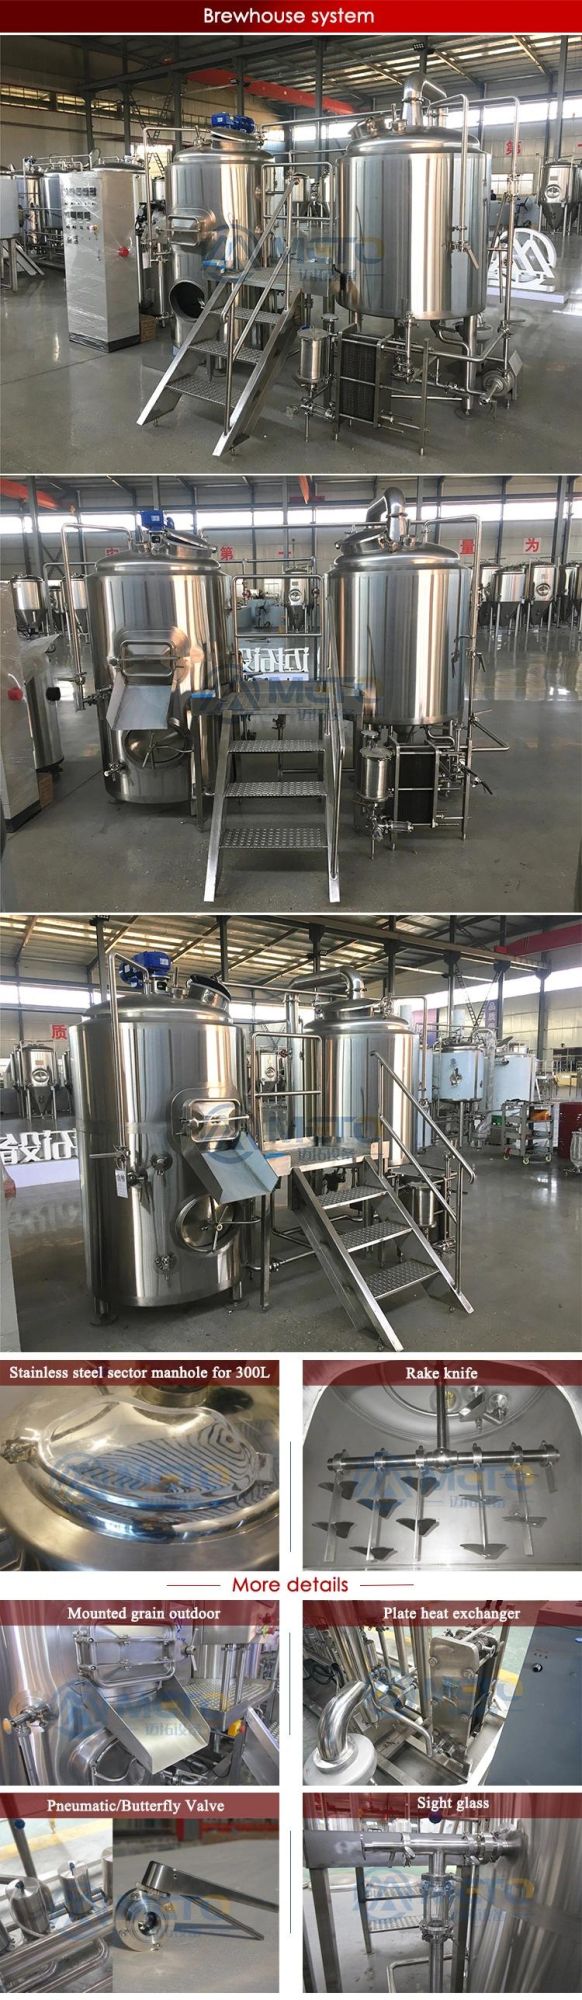 Steam Heating SUS304 300L Beer Brewing System for Brewpub